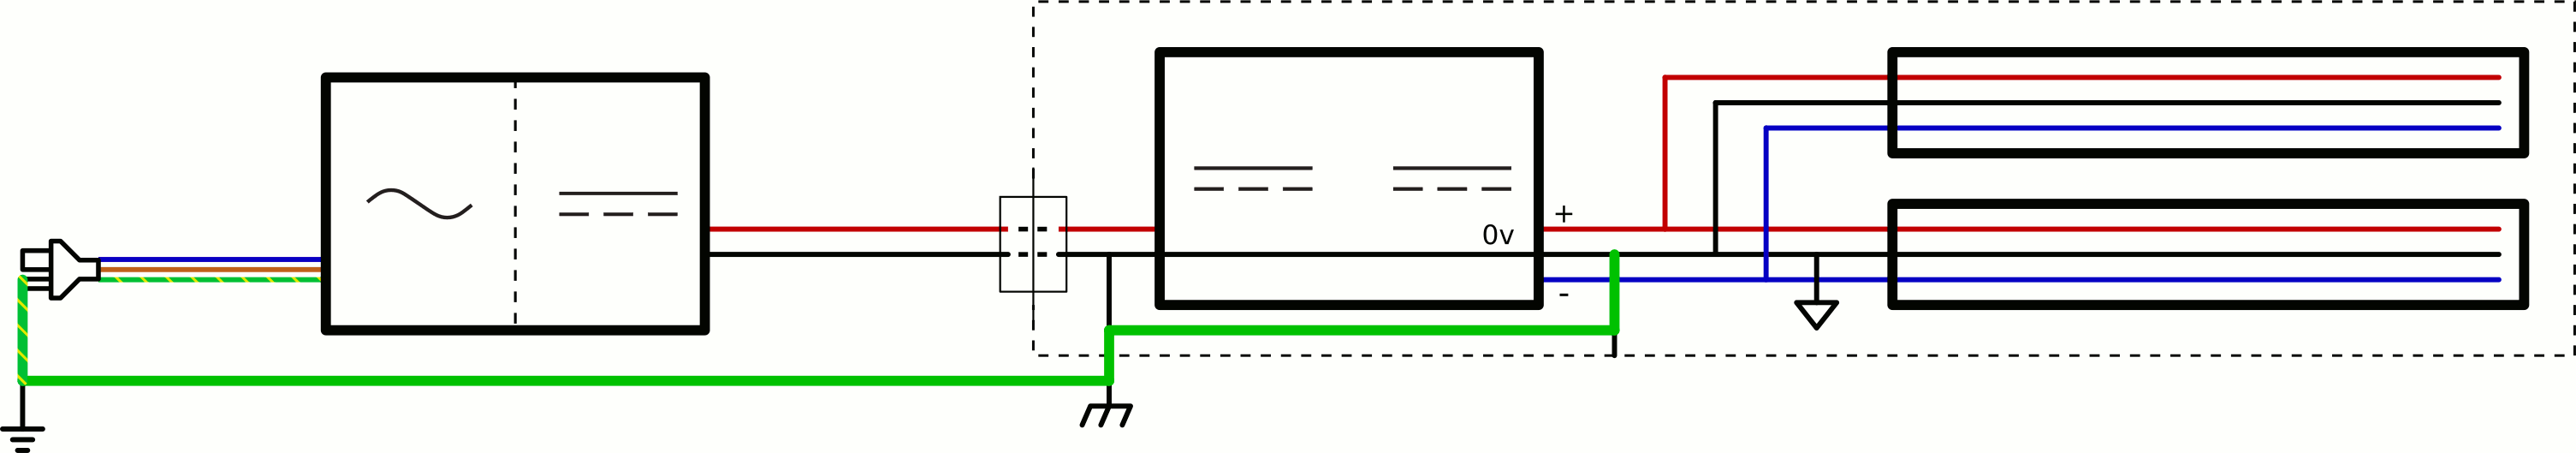 technical earth bypasses common 0v and power connection